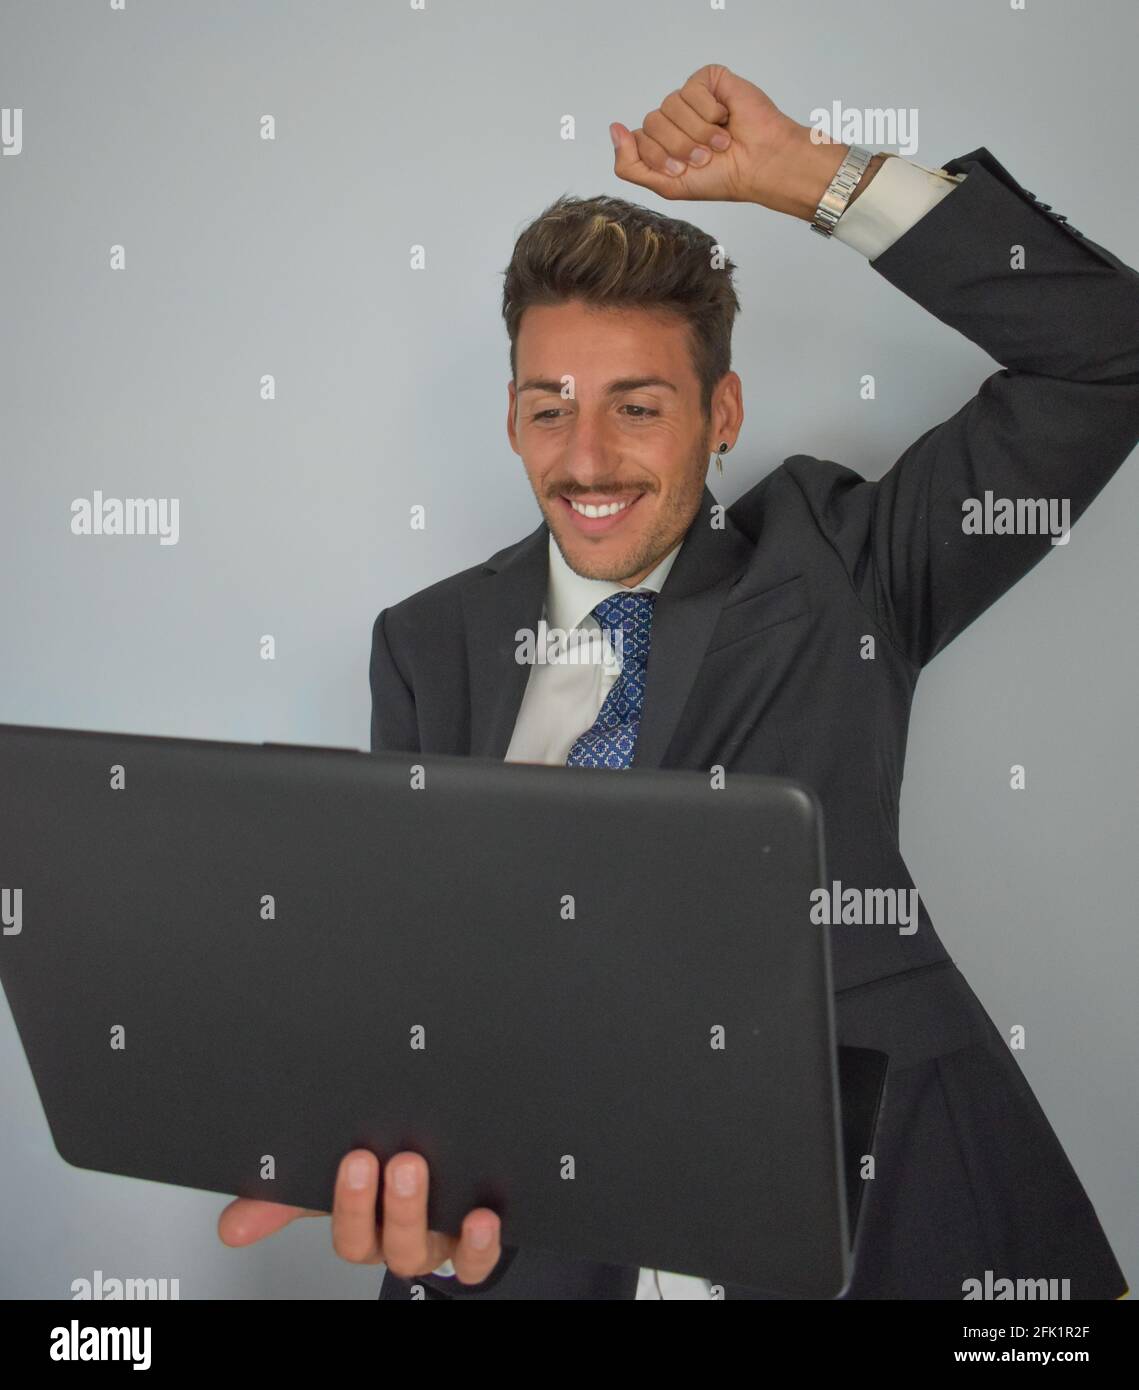 Young Spanish man doing a winner gesture during an online meeting with a laptop in a formal outfit Stock Photo